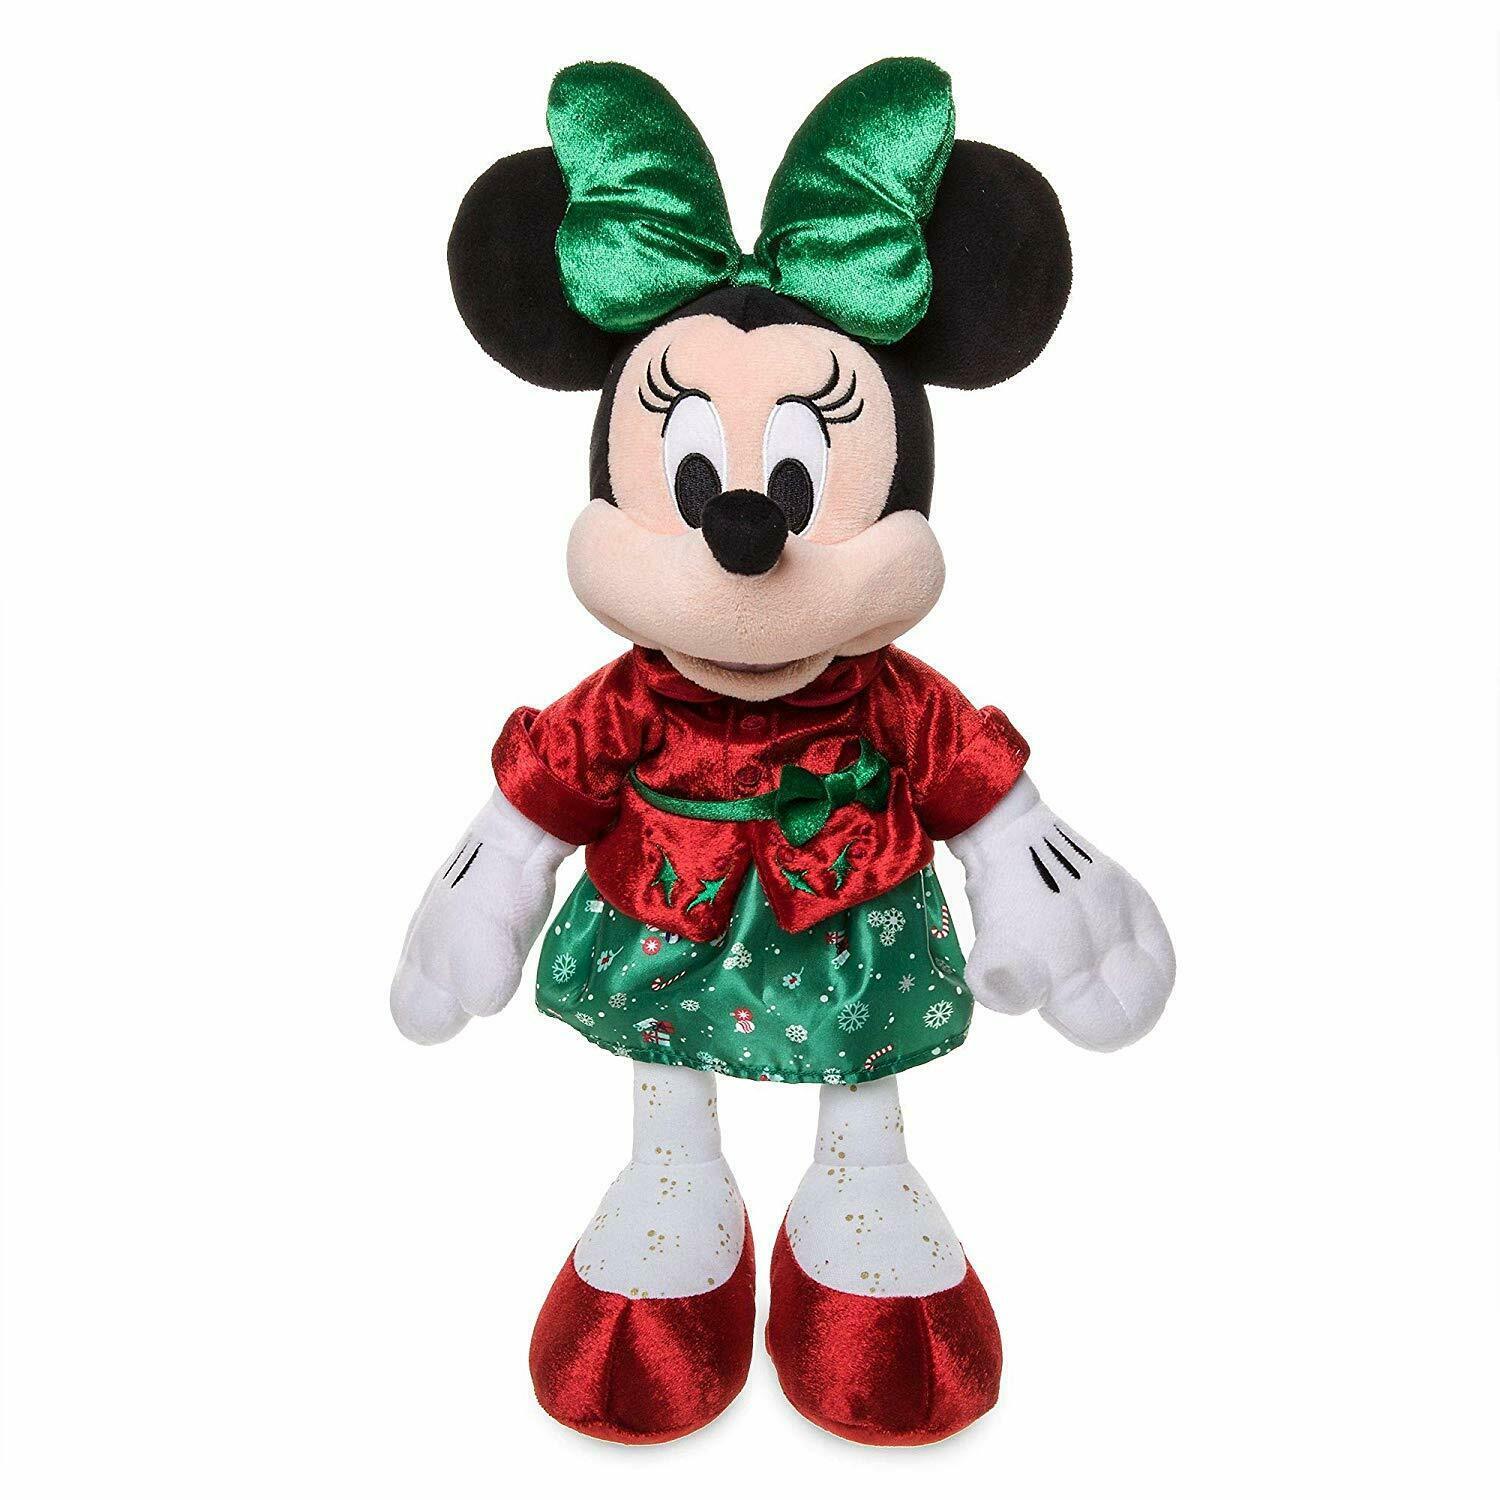 Disney Minnie Mouse Deluxe Christmas Soft Plush Toy Doll 39cm